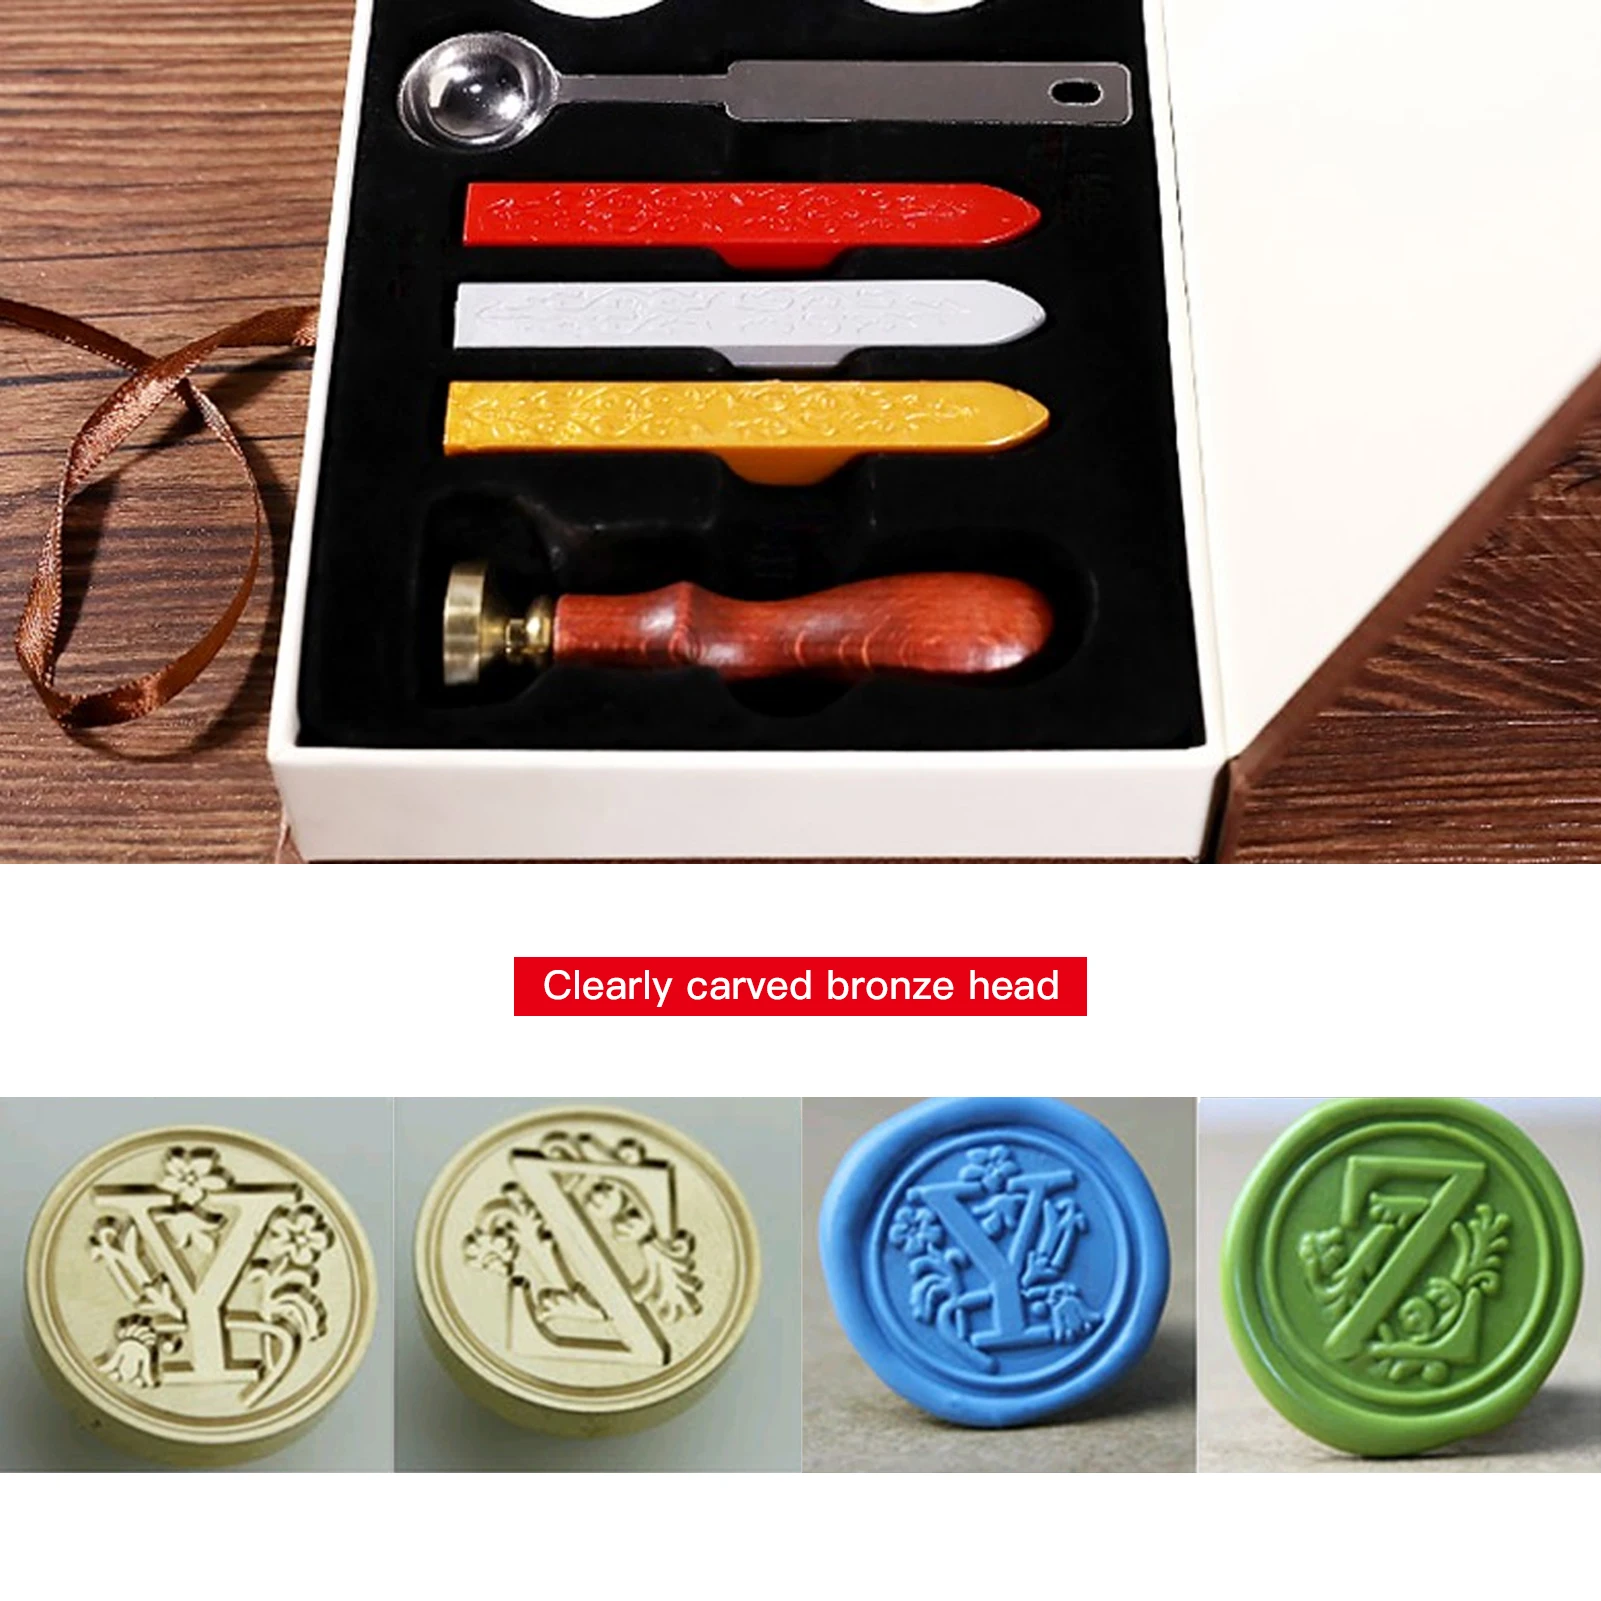 

Wax Seal Stamp Kit Classic Wax Stamps with Sealing Wax Sticks for Cards Envelopes Invitations Wine Packages Wedding Letters